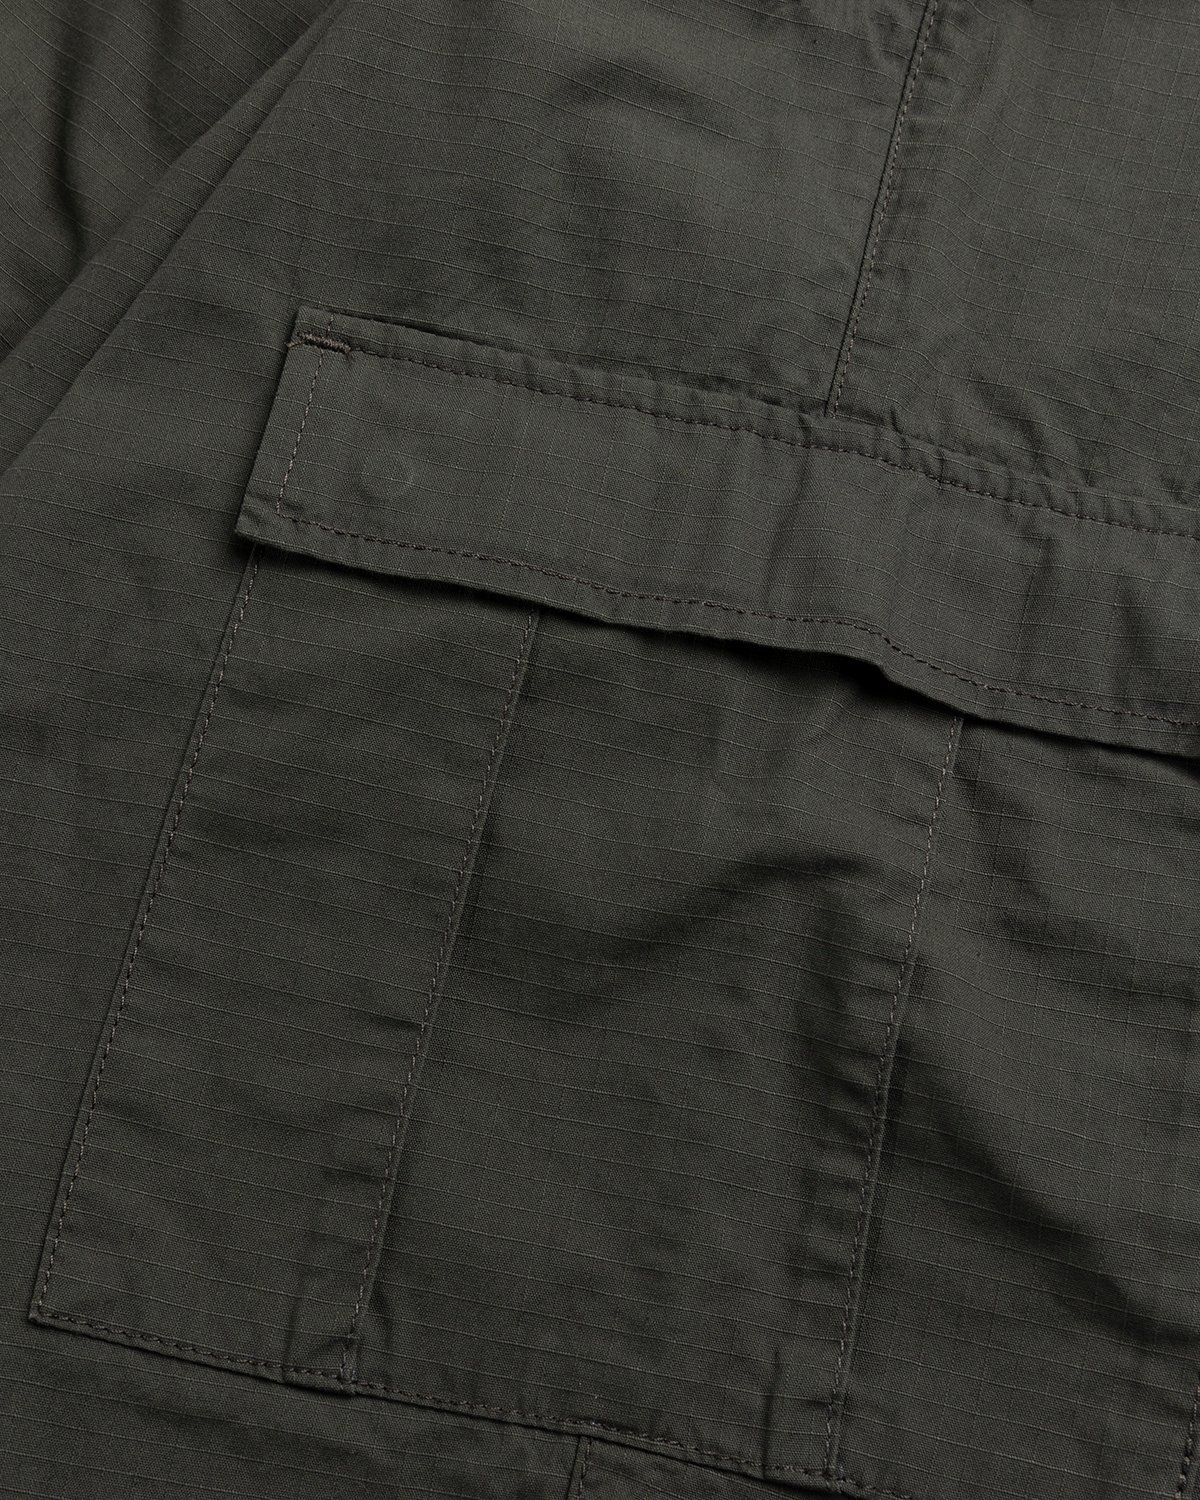 Carhartt WIP – Cargo Jogger Cypress Rinsed - Cargo Pants - Green - Image 4